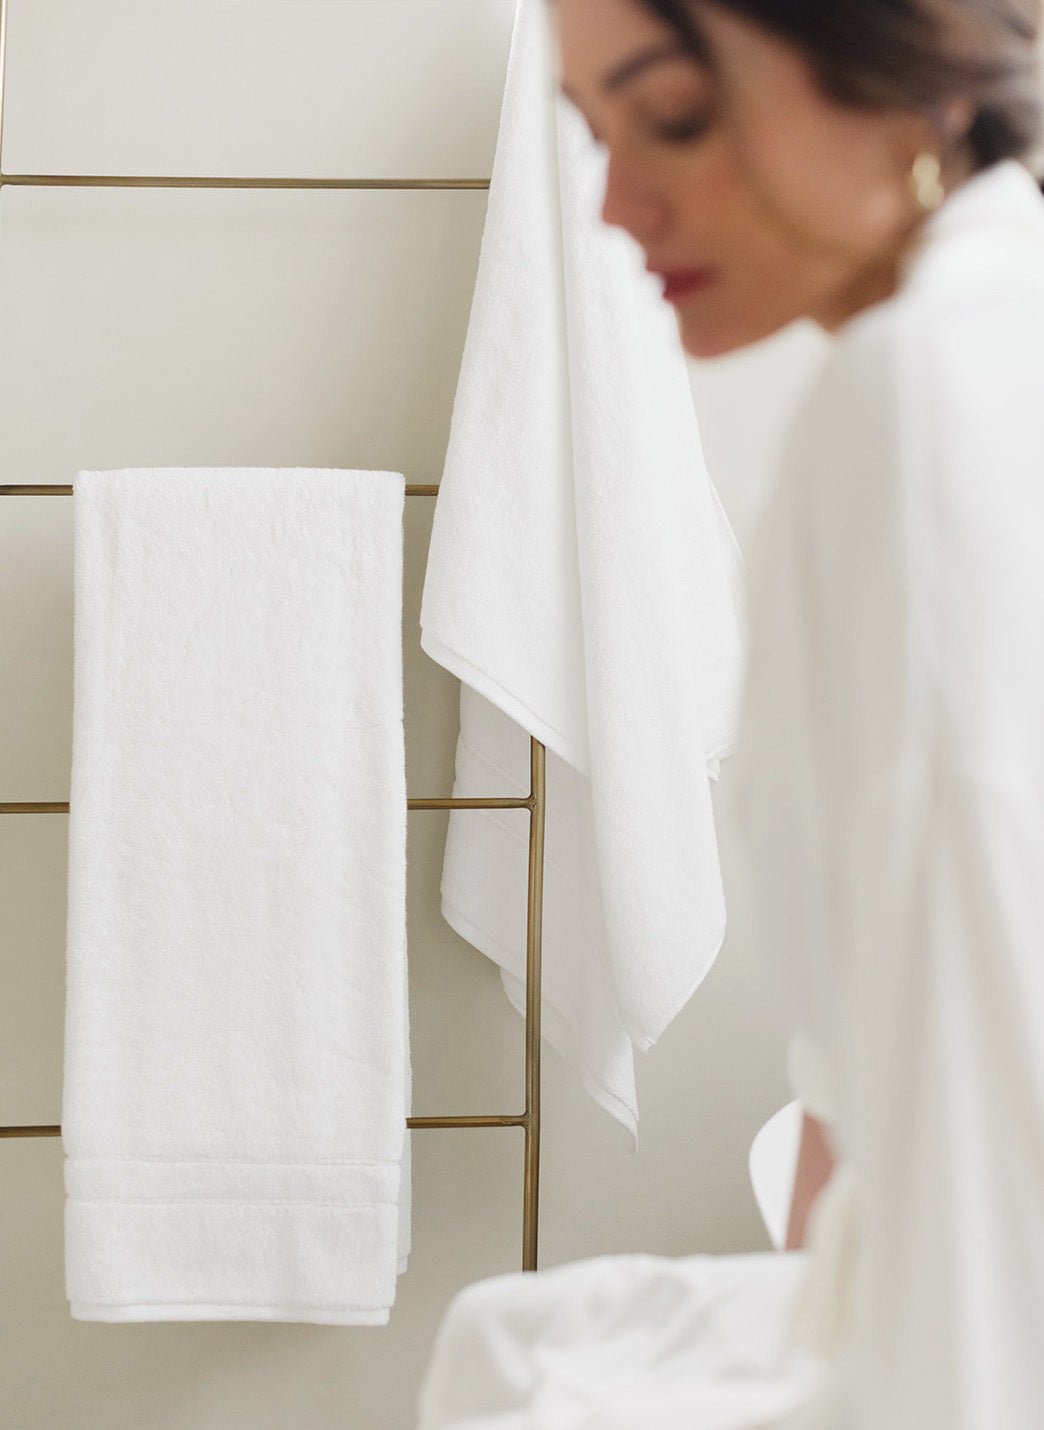 Premium Plush Bath Towels in the color White. Photo of Premium Plush Bath Towels taken in a bathroom showing a woman who is out of the focus of the picture. The towels are hung from a towel rack. 